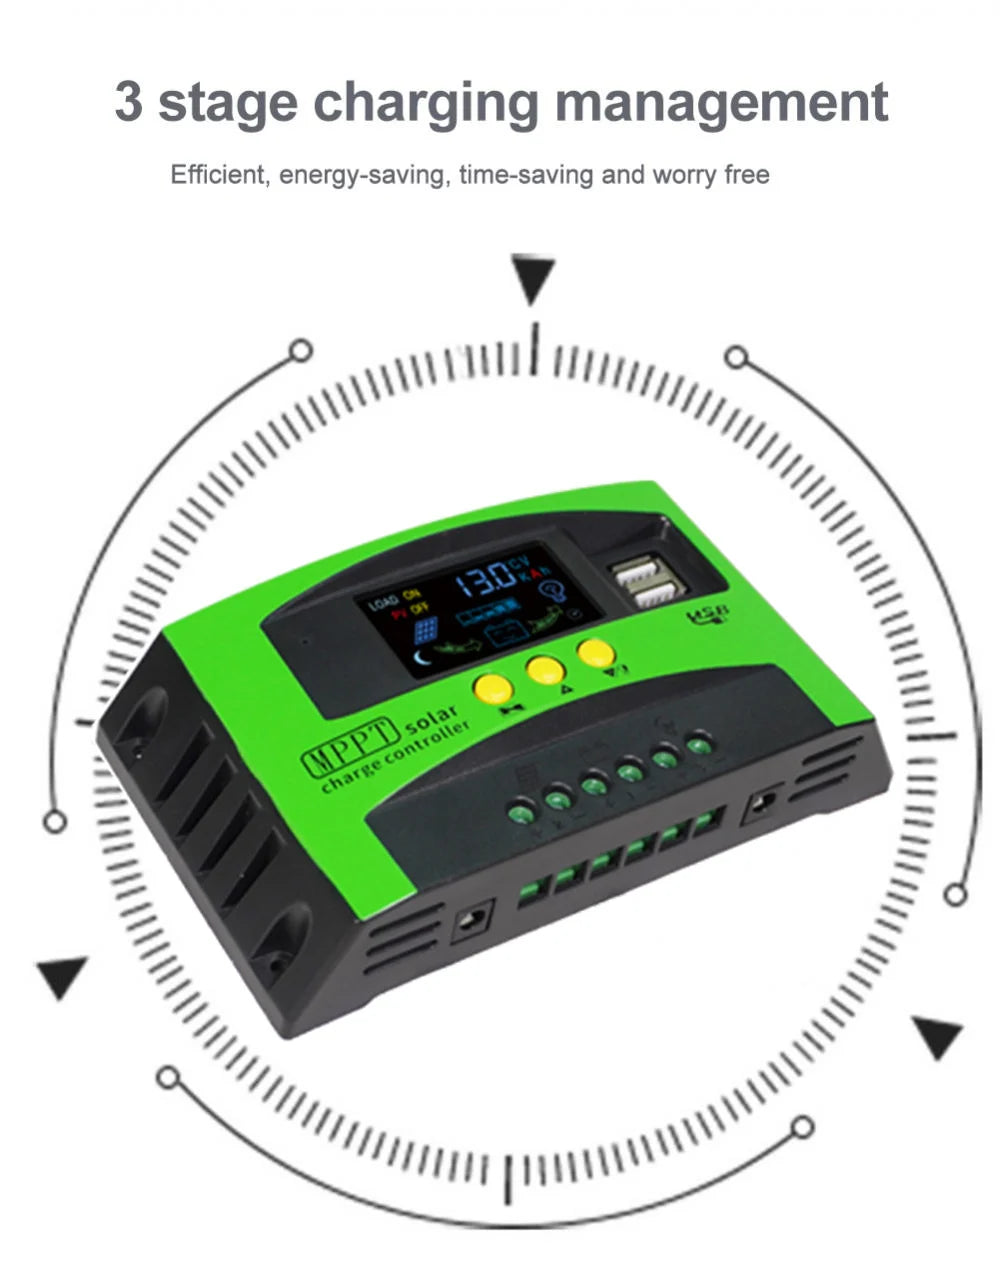 Three-stage charging management for efficient, energy-saving, and worry-free solar power regulation.